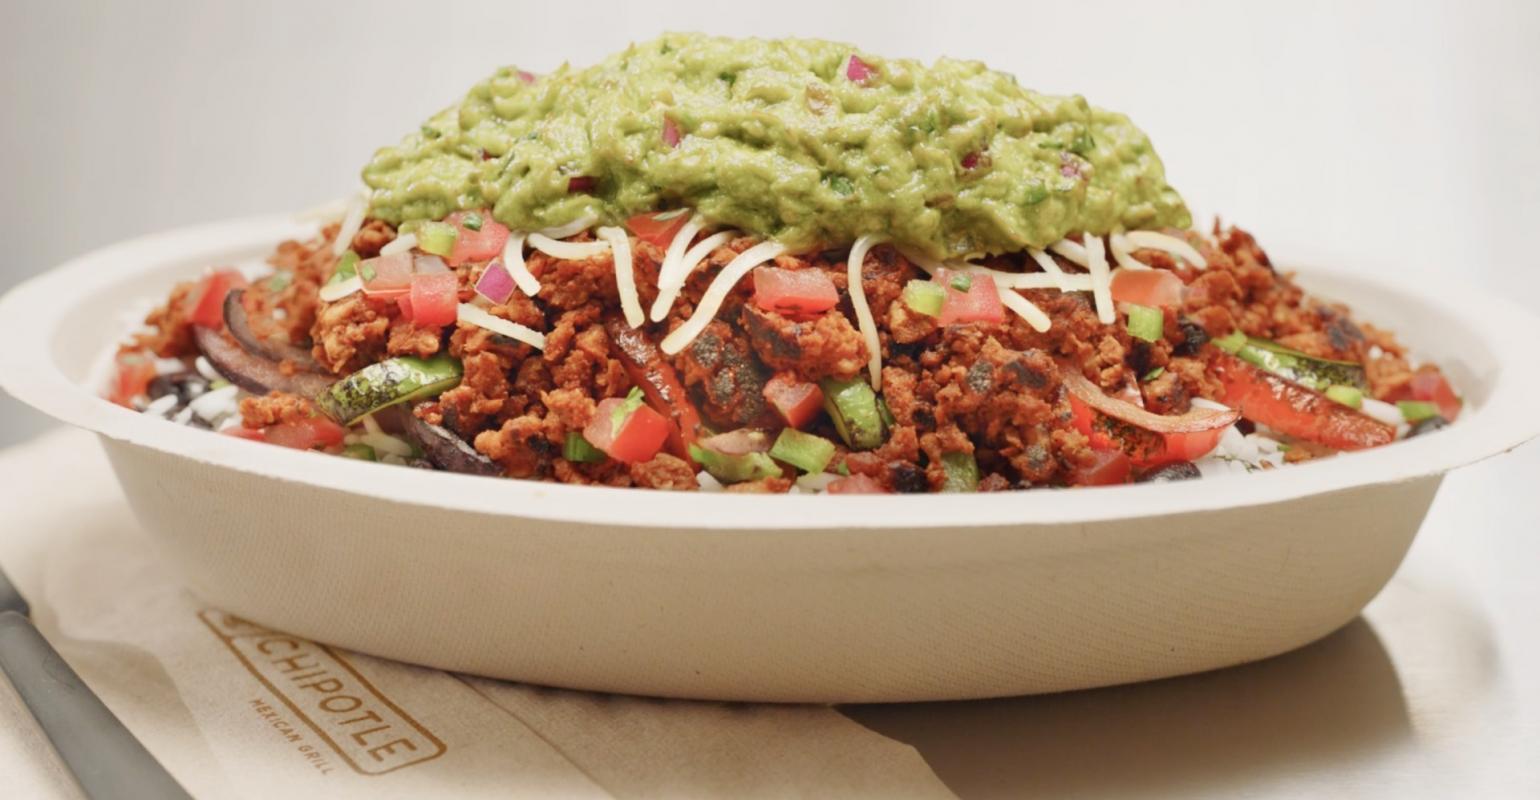 Chipotle increases unit growth to 7,000 across North America | Nation's Restaurant News